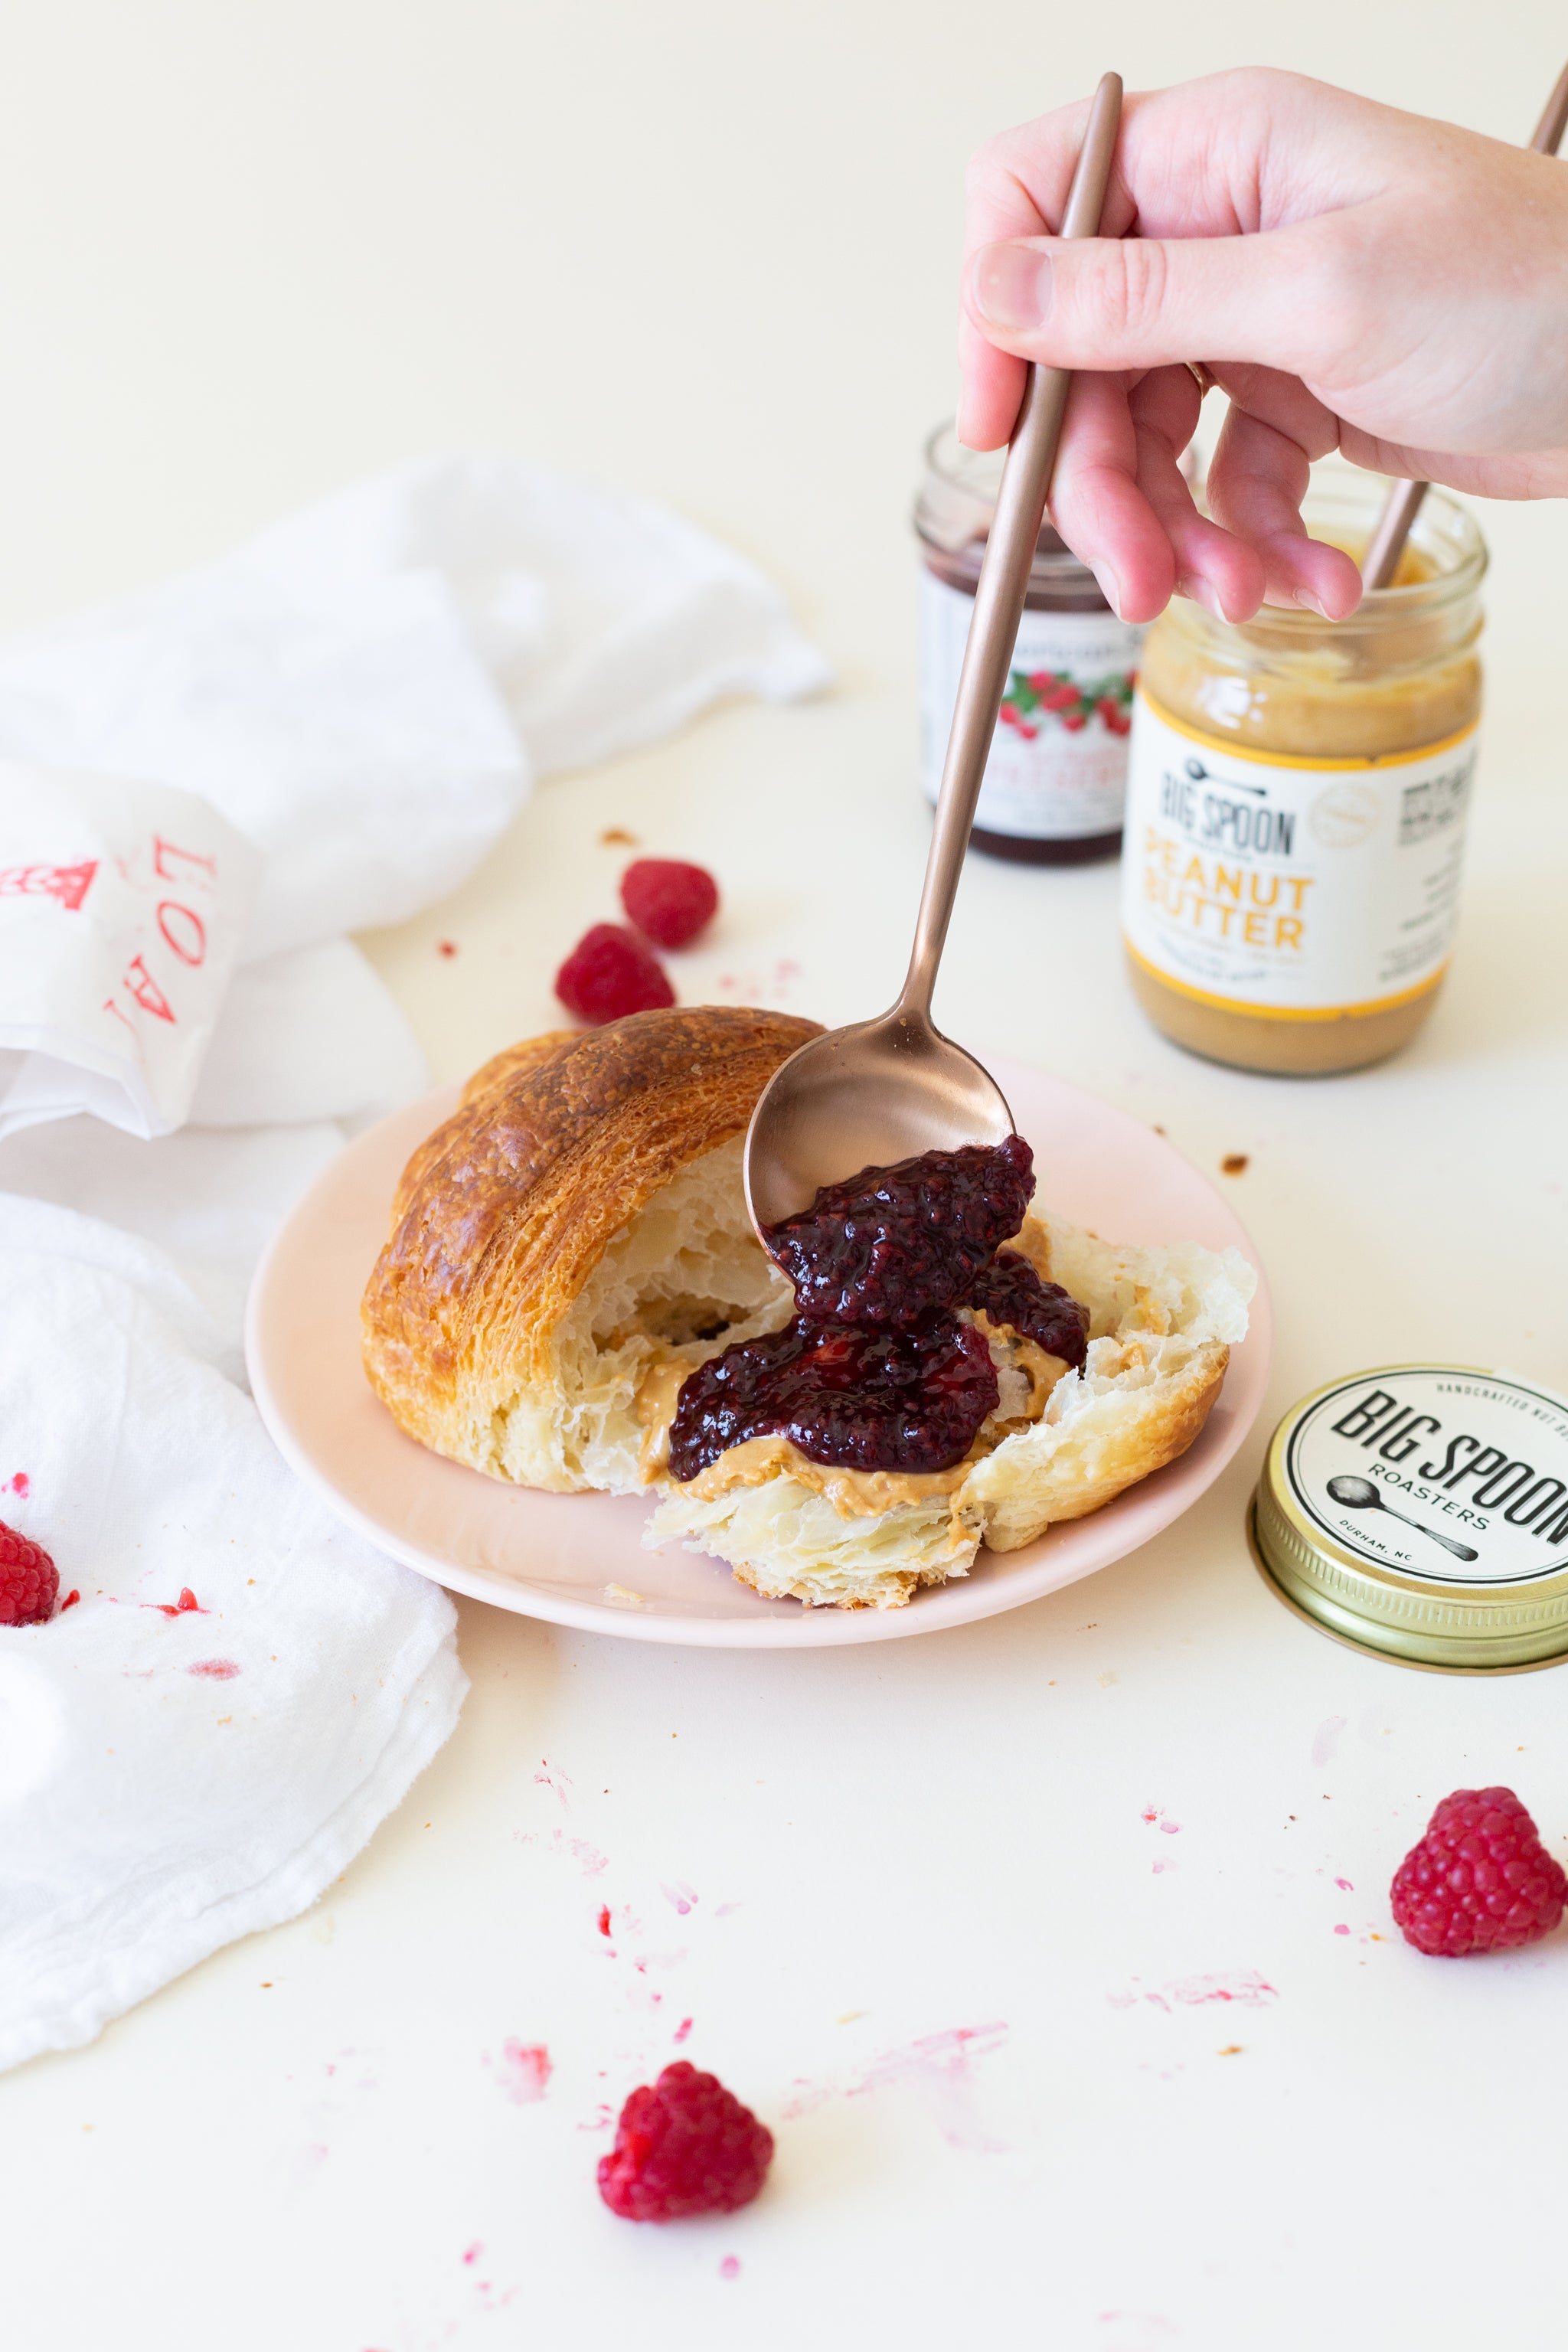 August Featured Jam - American Spoon Red Raspberry Preserves